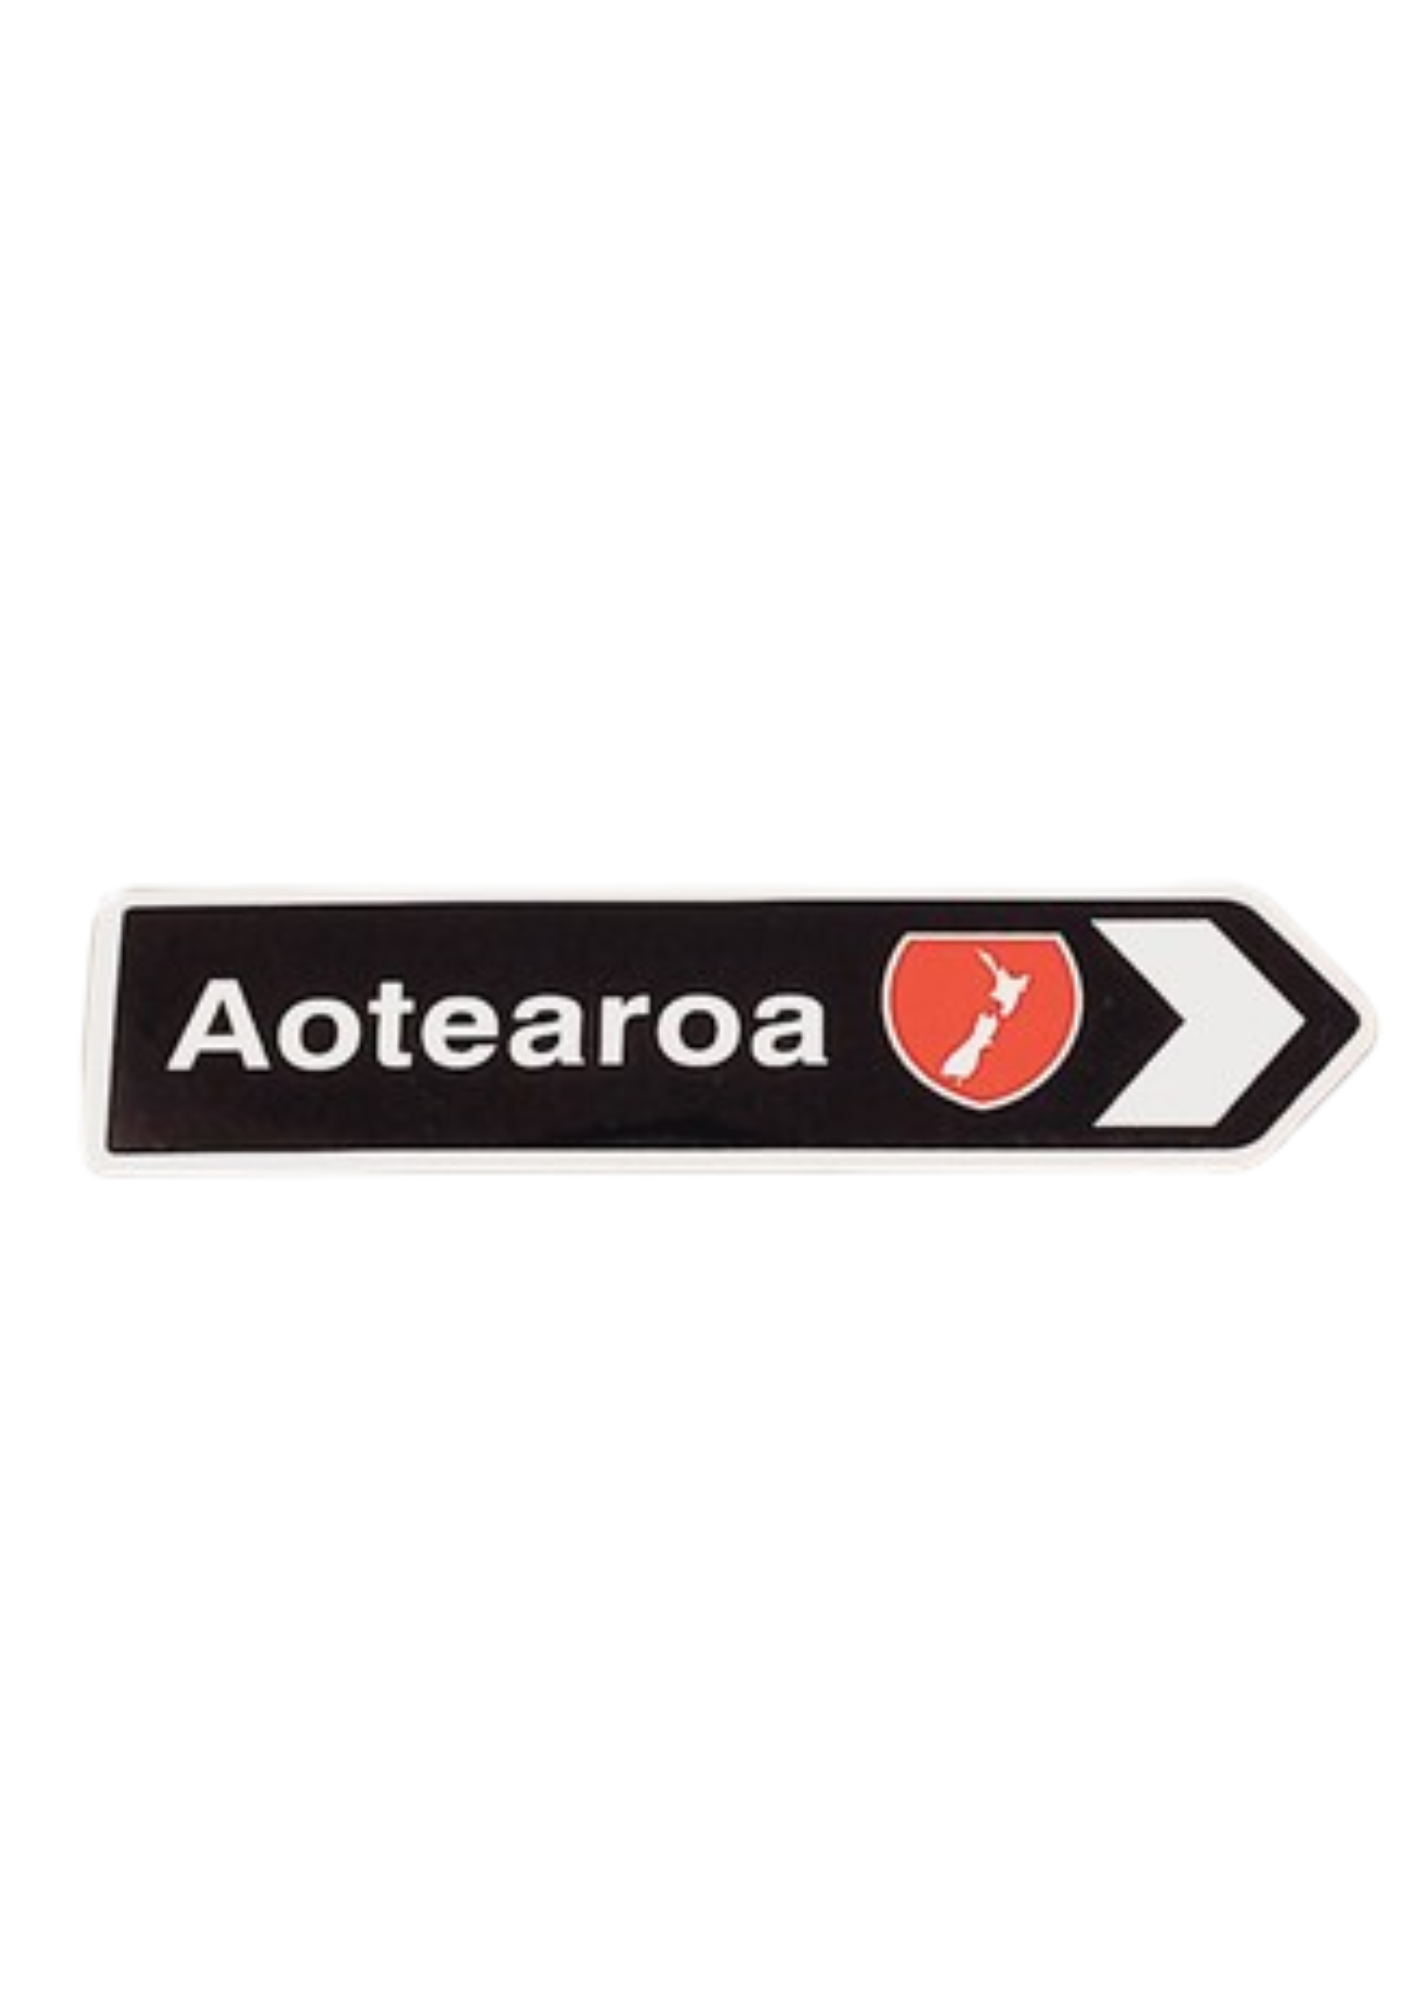 A 1 Traffic Road Sign Magnet